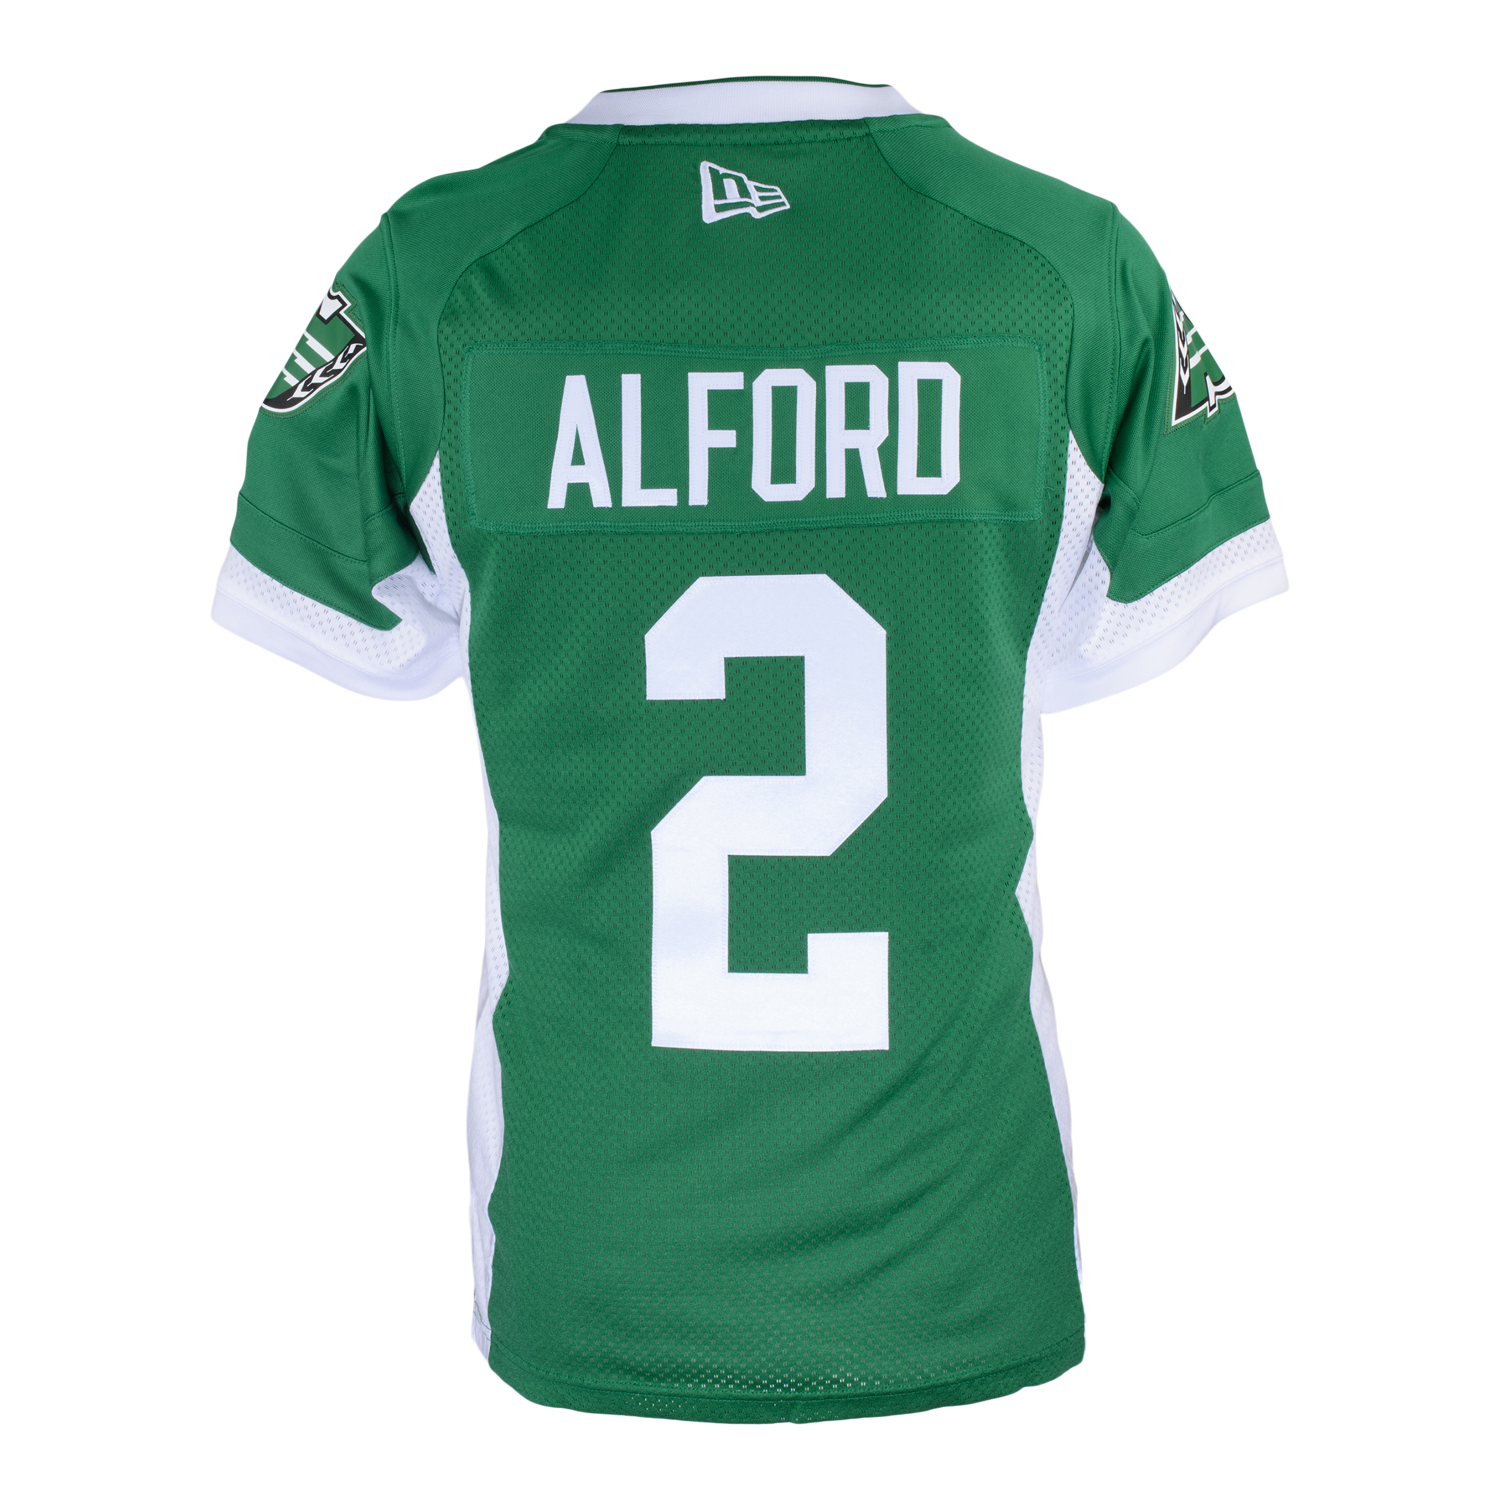 Men's Customized Home Jersey - Alford